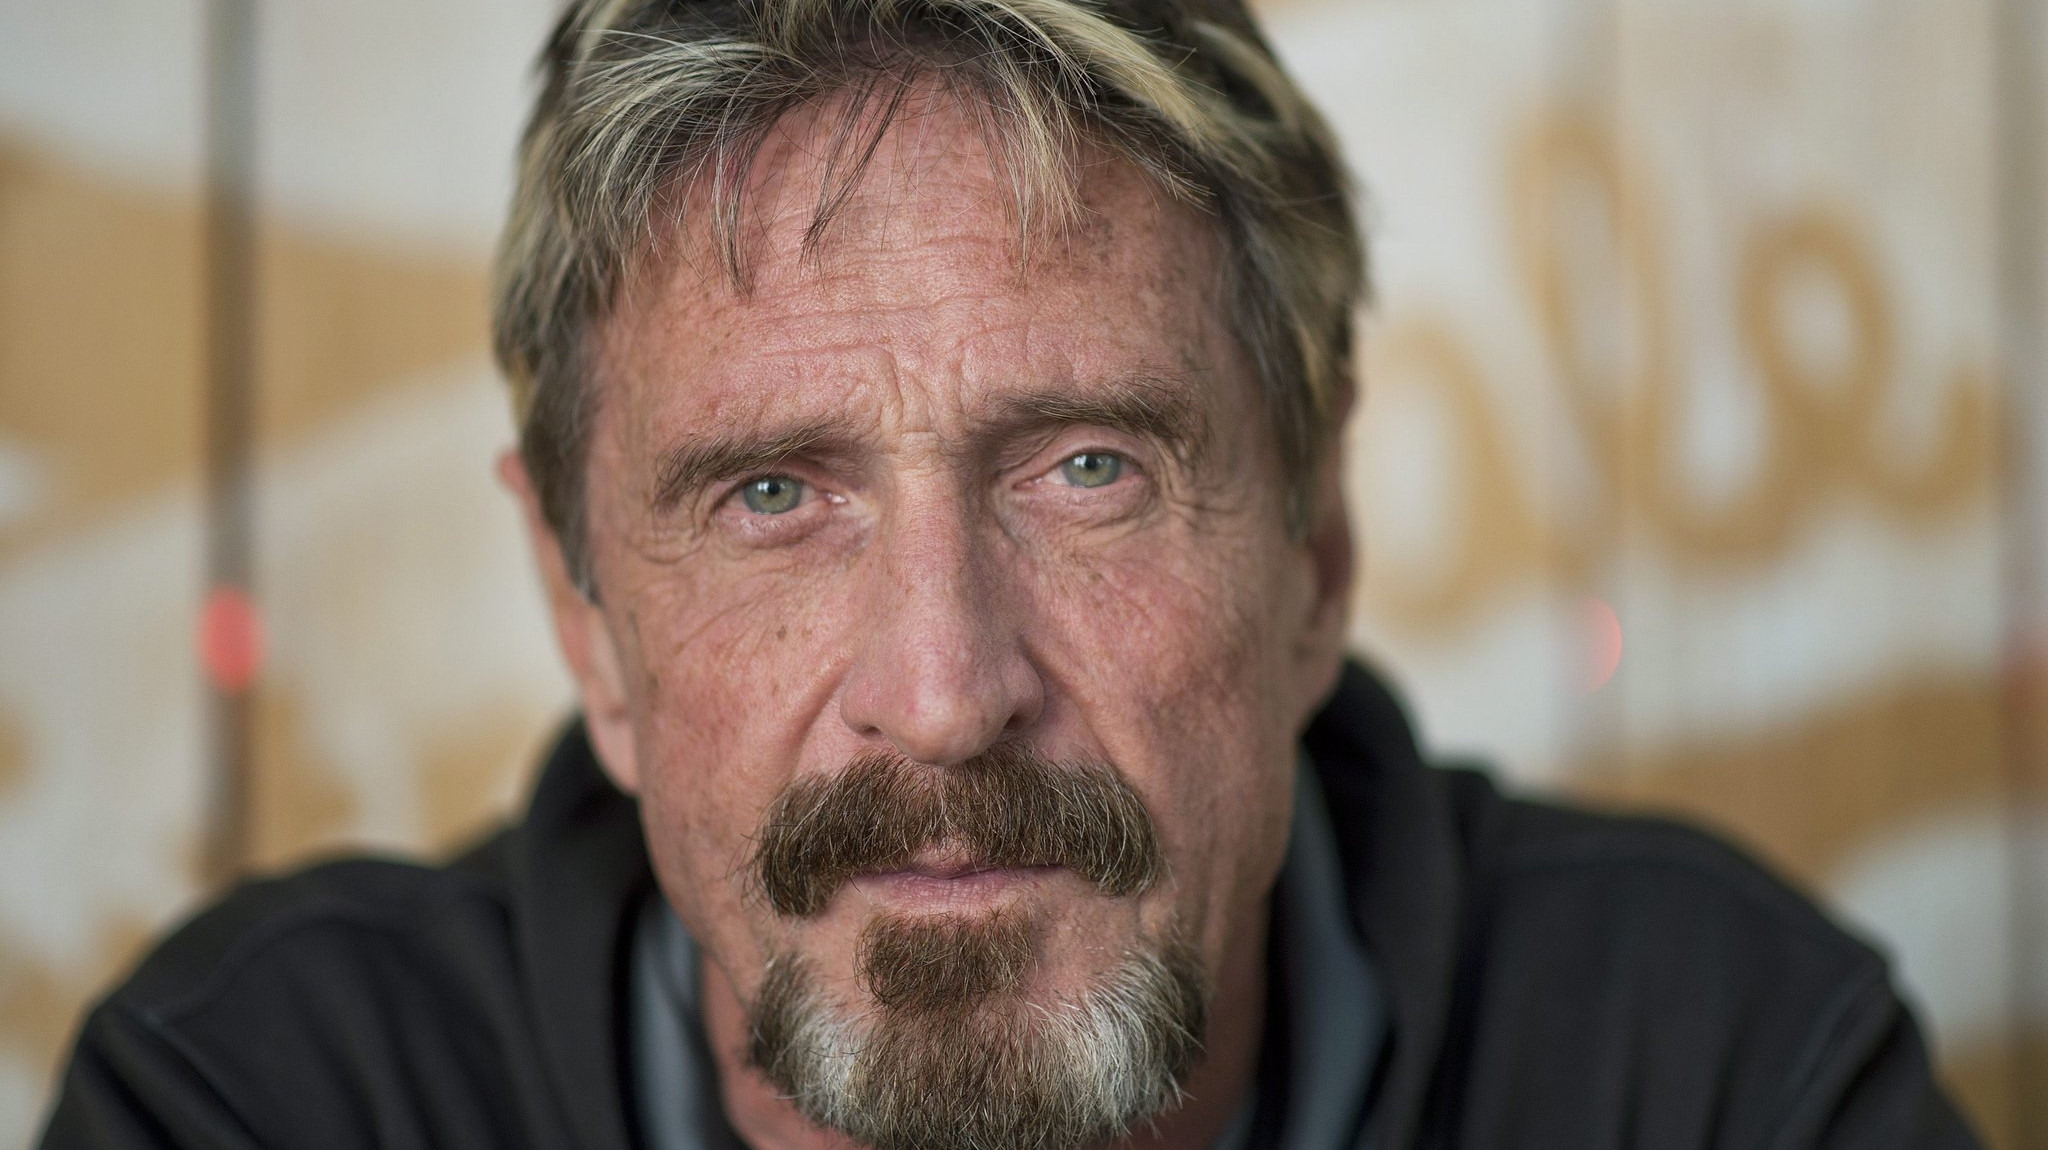  John McAfee charged with fraud for pushing cryptocurrencies, could face even more prison time 